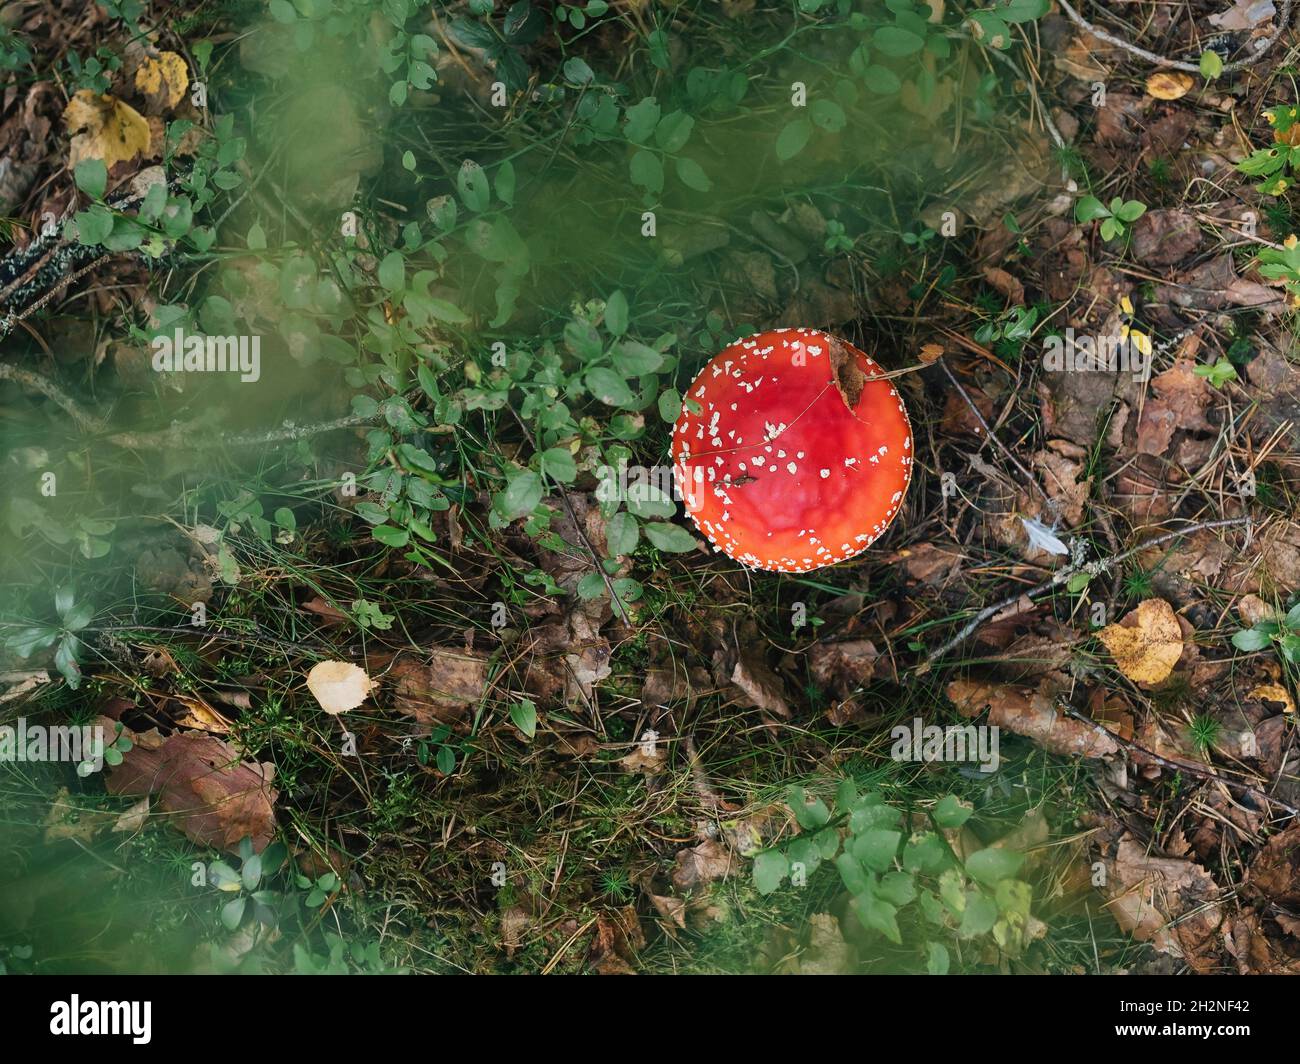 Fly agaric mushroom in forest Stock Photo